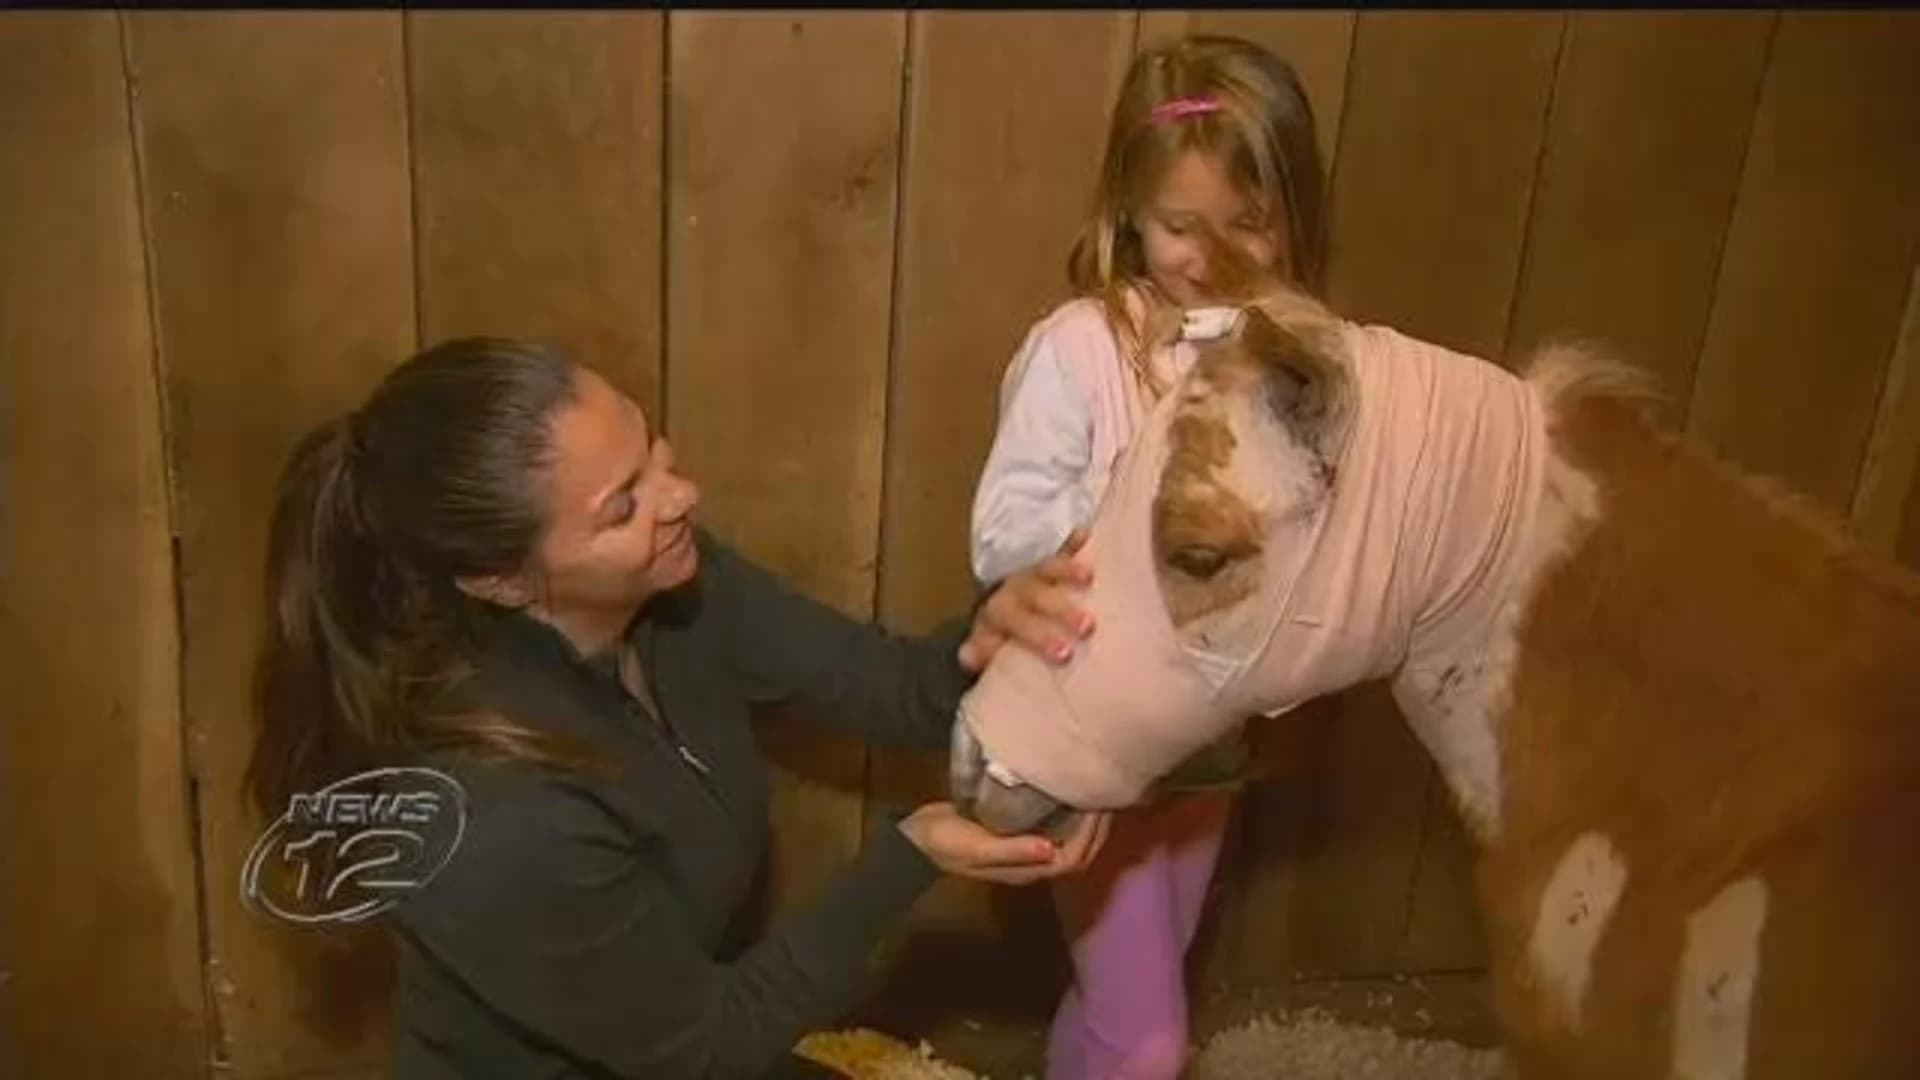 Neighbor to sue after mini-horse is attacked by dogs